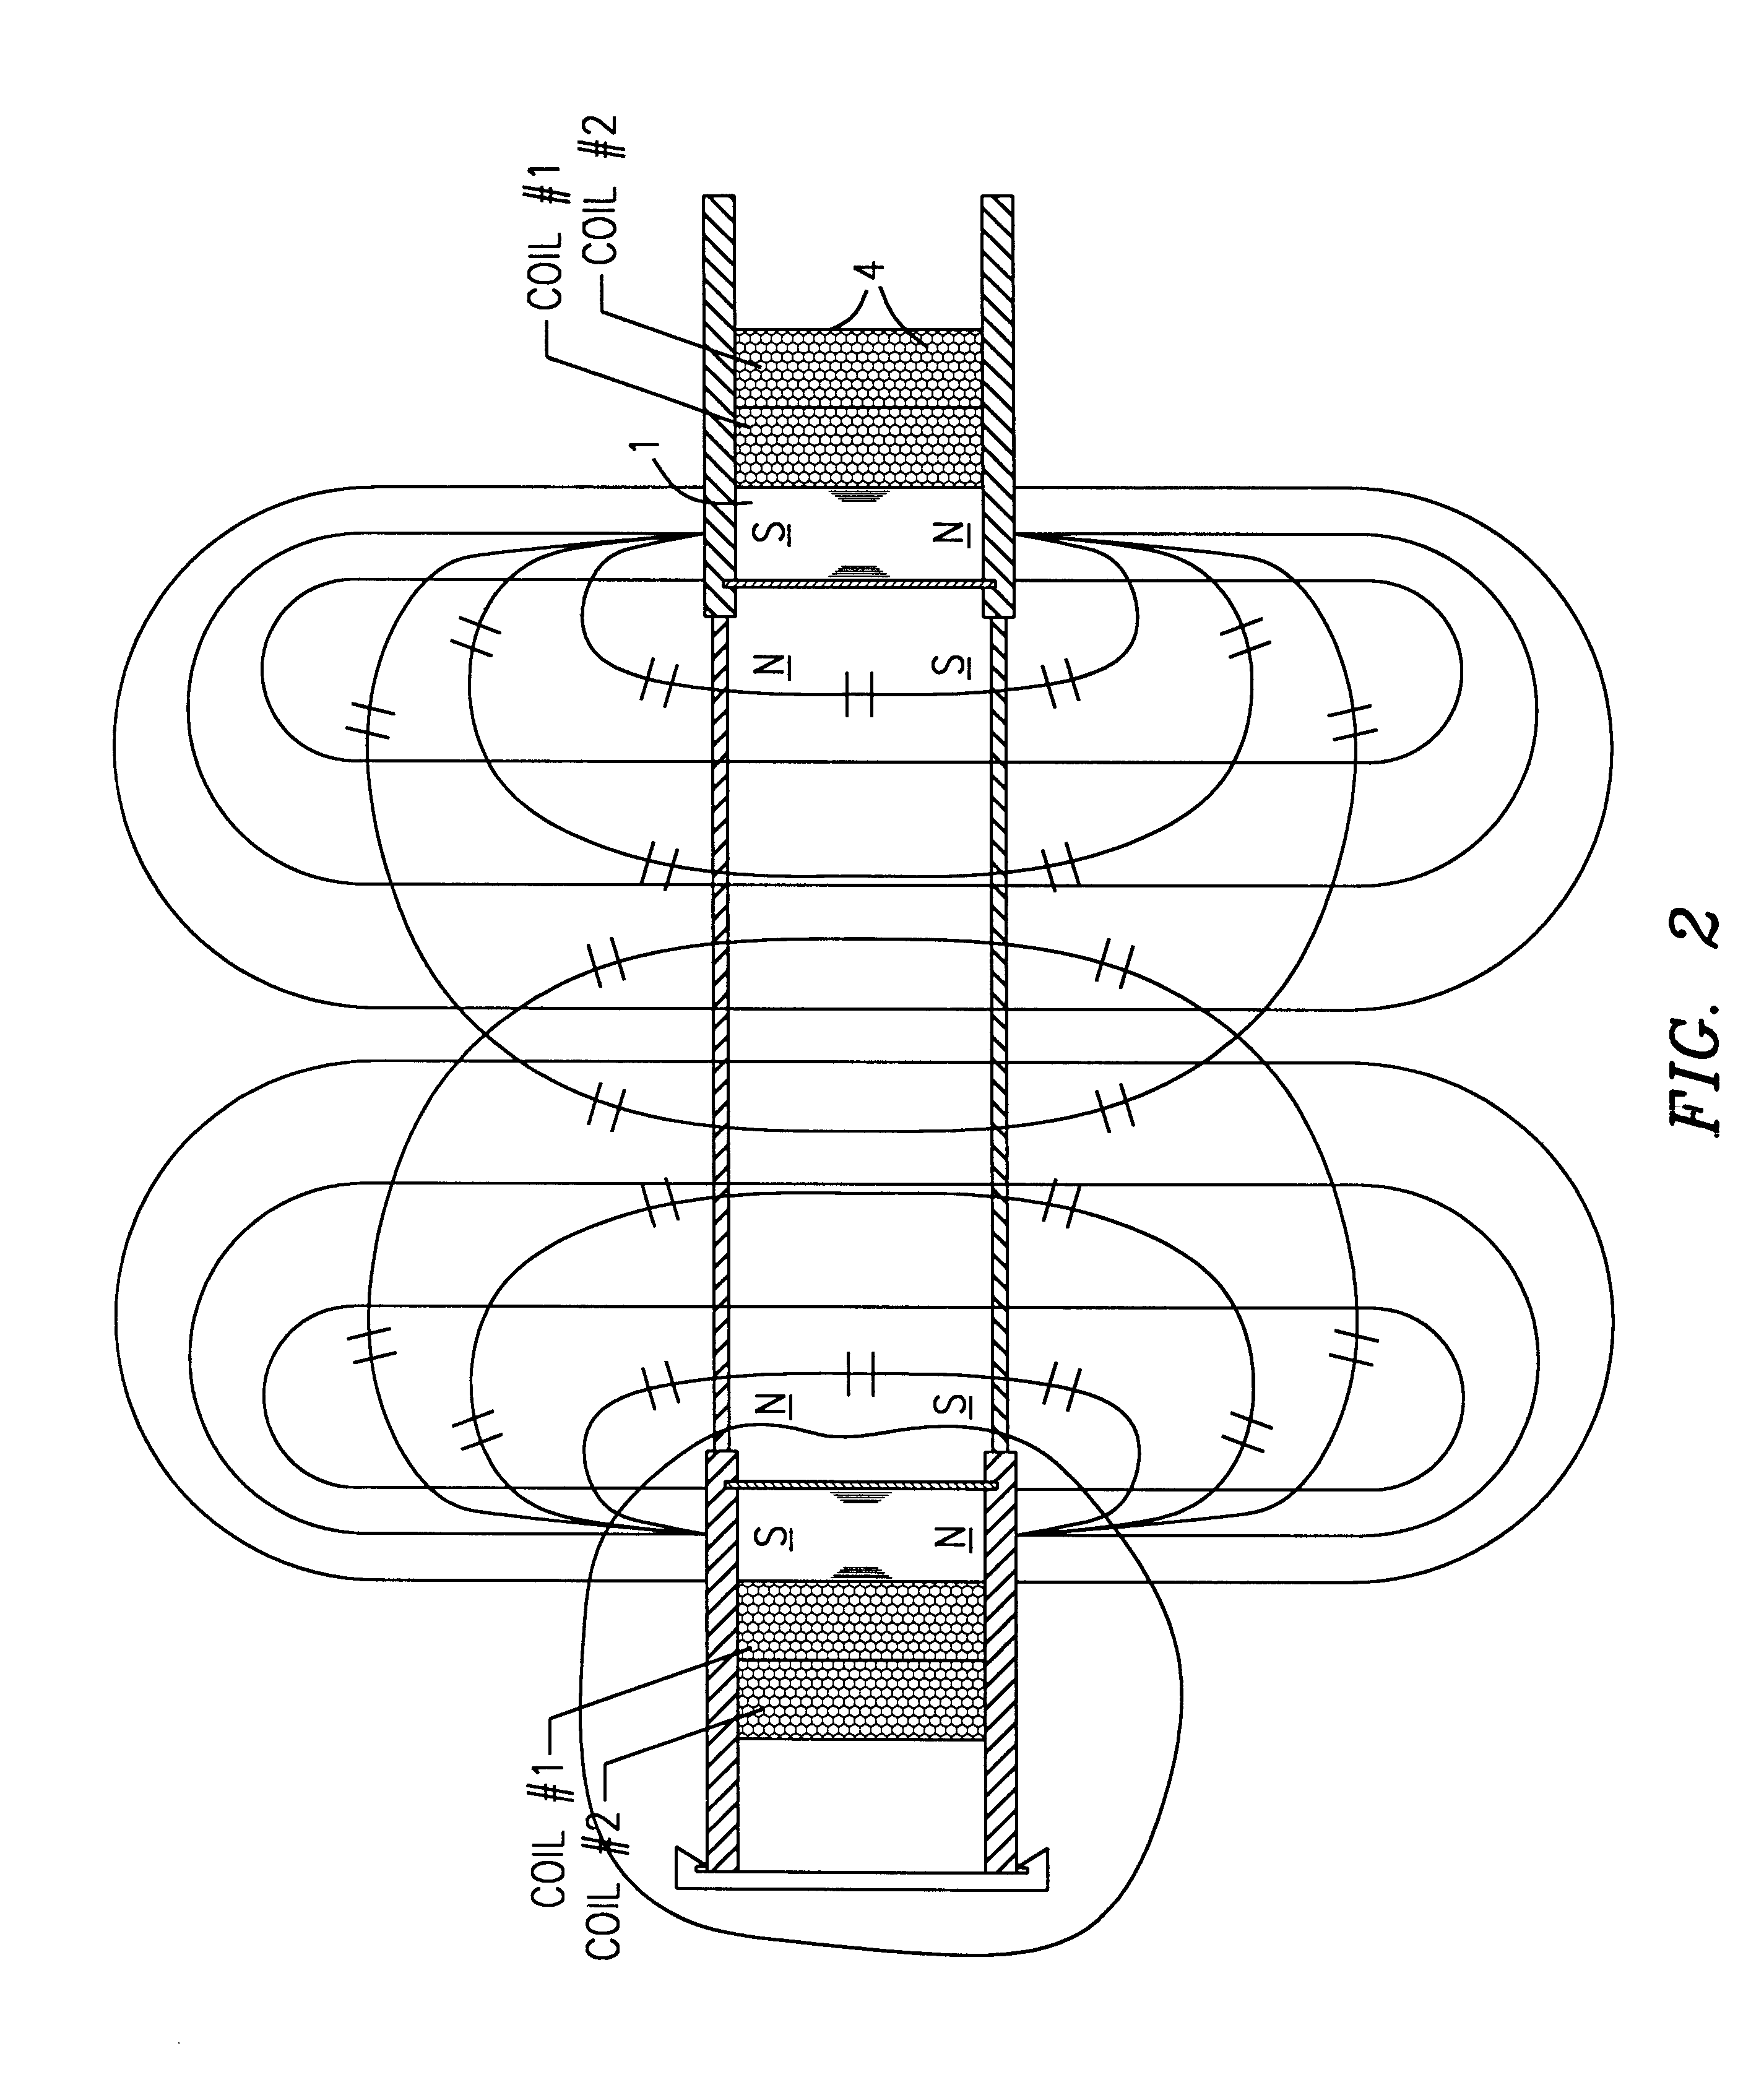 System and method for treating cells using electromagnetic-based radiation